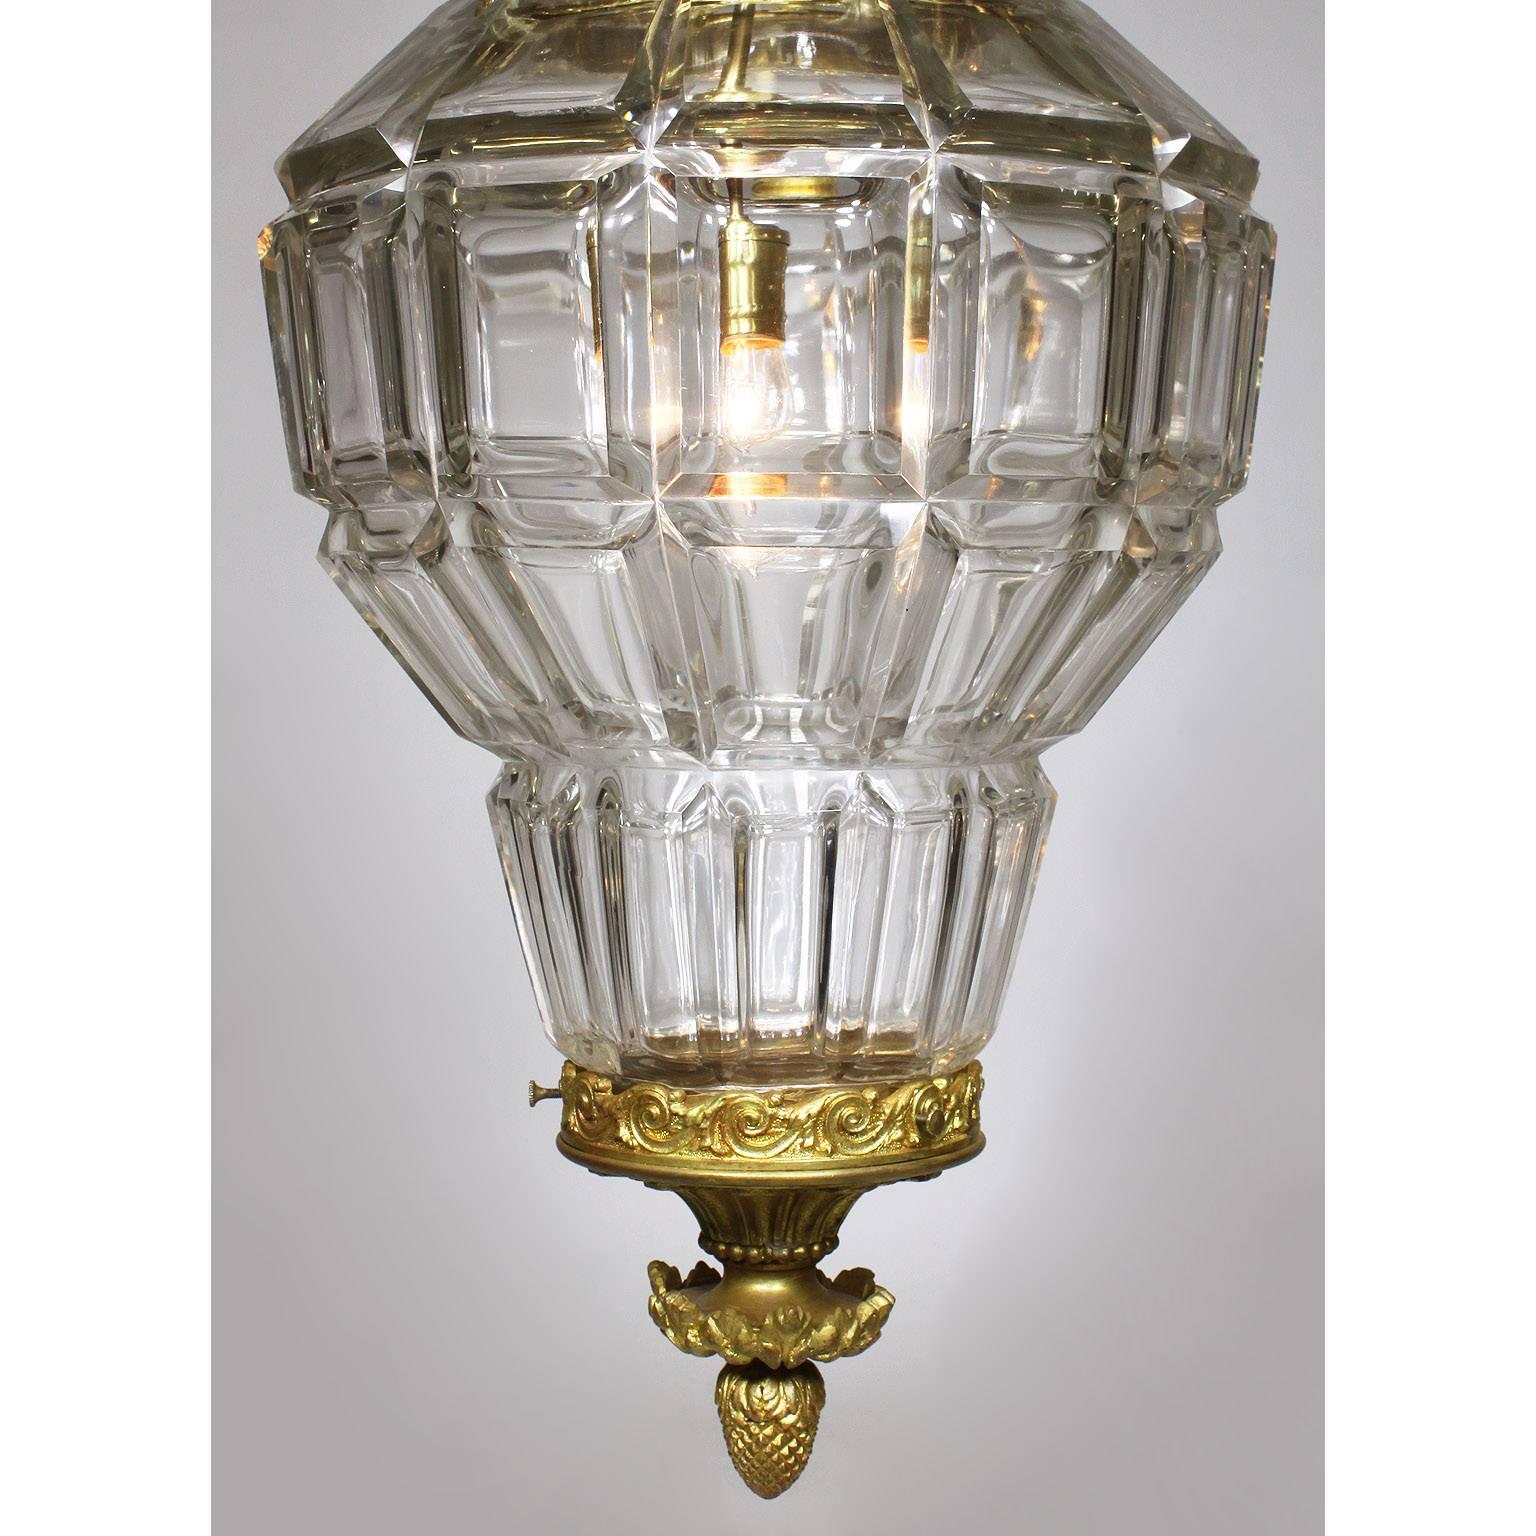 Carved French 19th-20th Century Gilt-Bronze and Cut-Glass 